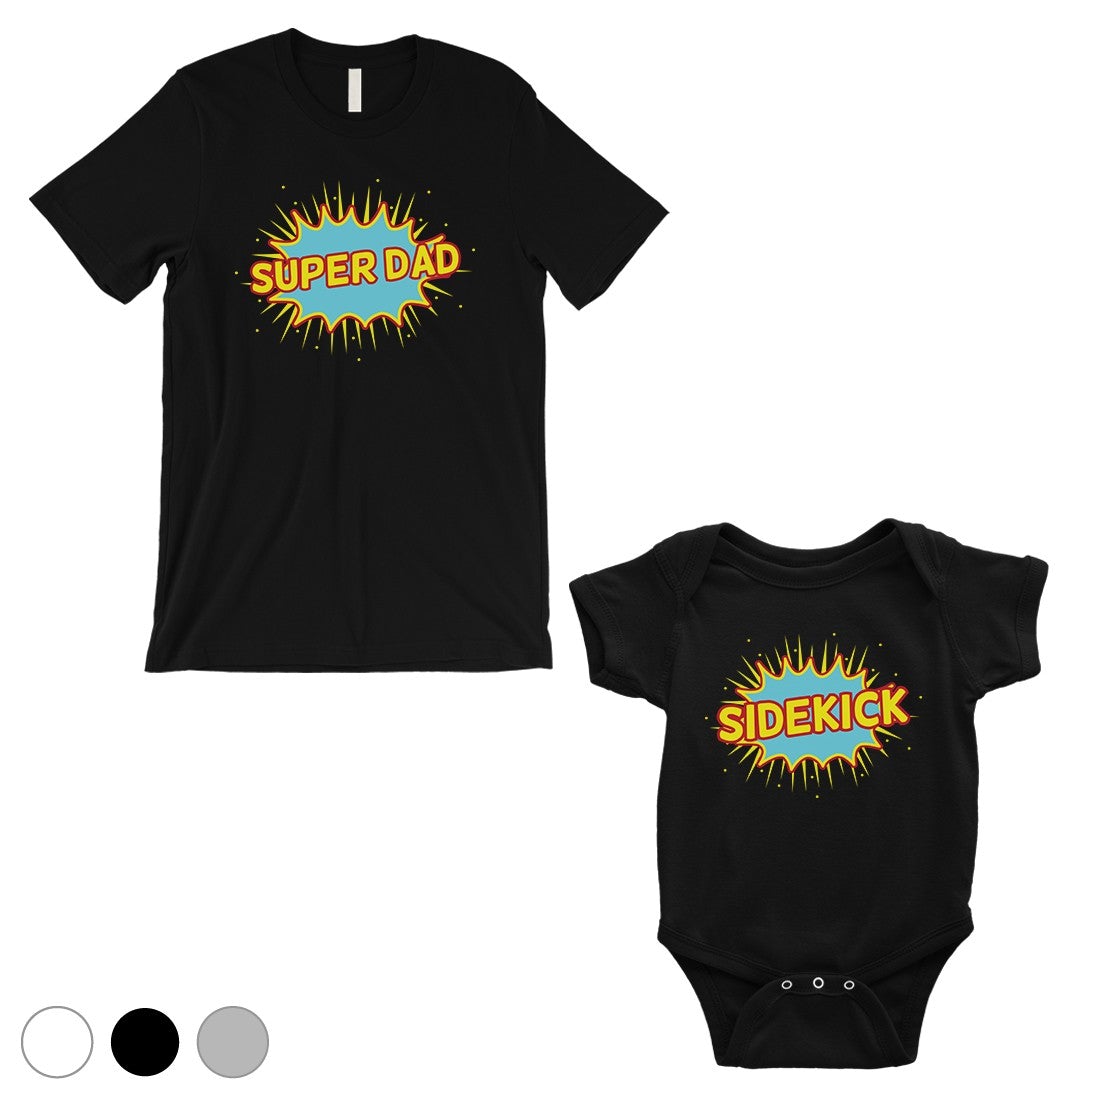 Super Dad Sidekick Dad and Baby Matching Outfits Black